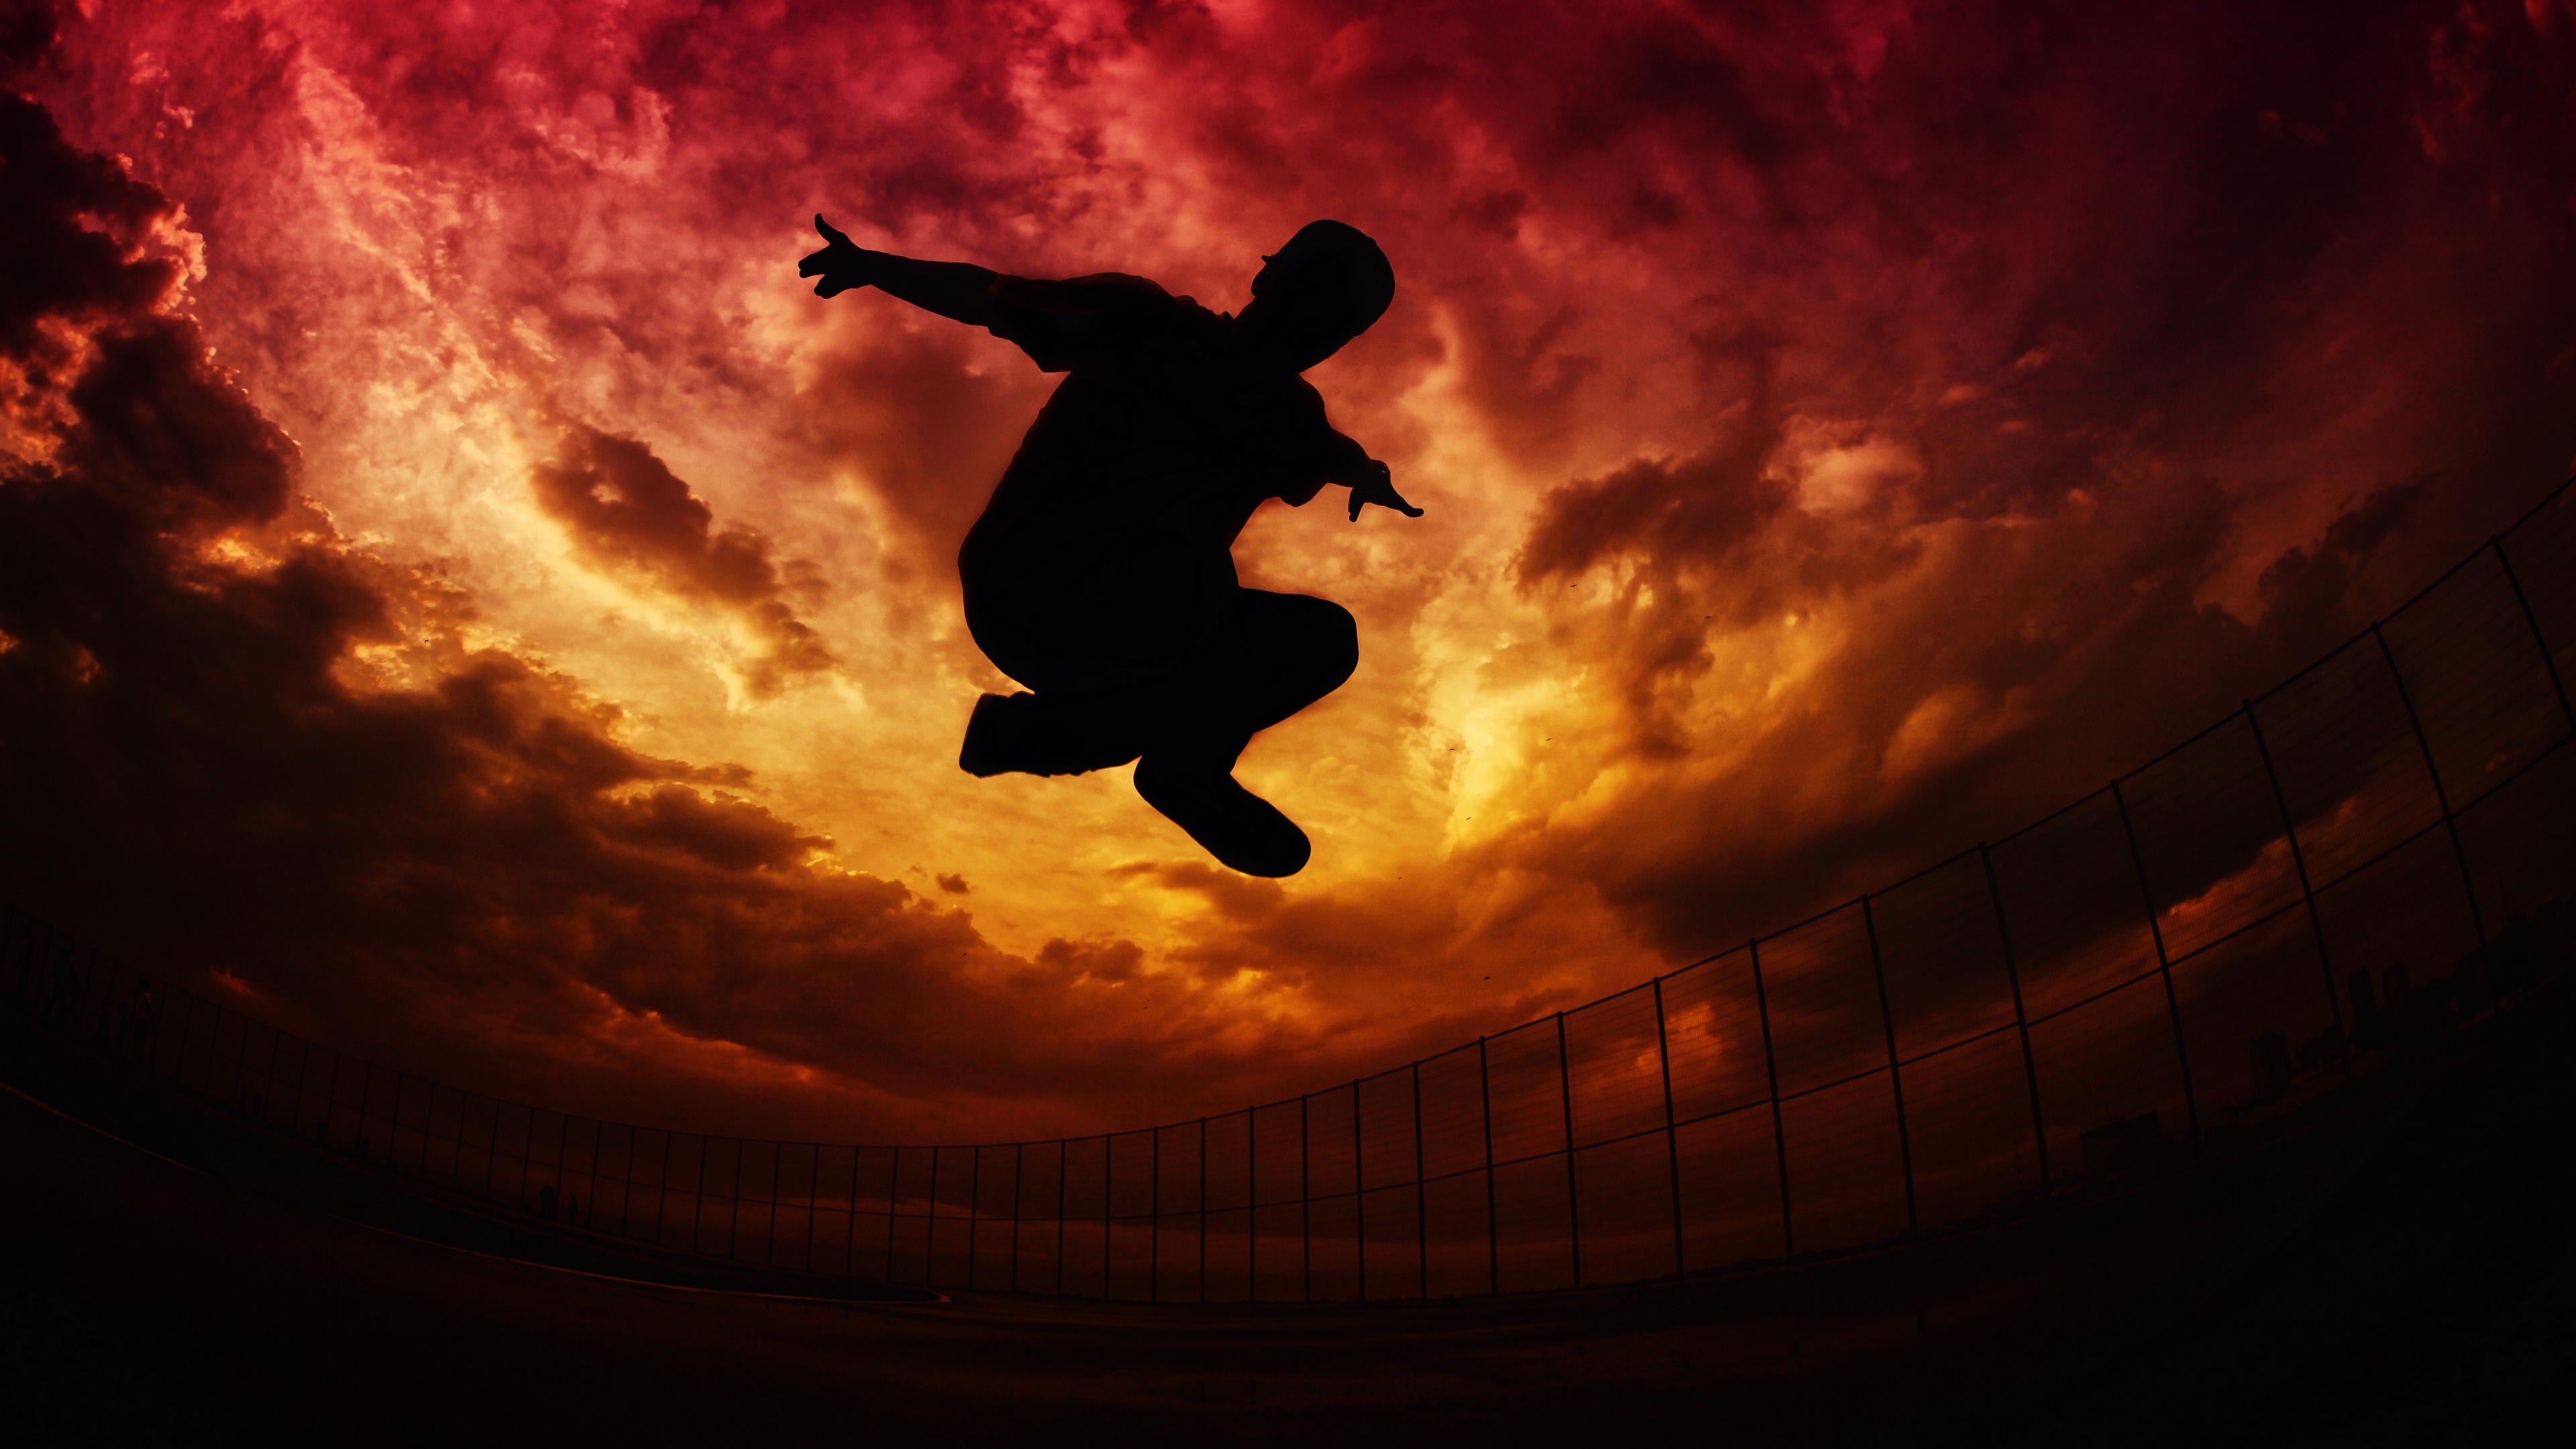 Freerunning: Artistry over efficiency and speed, Parkour, Founded by Sebastien Foucan, Stunt performer. 3840x2160 4K Wallpaper.